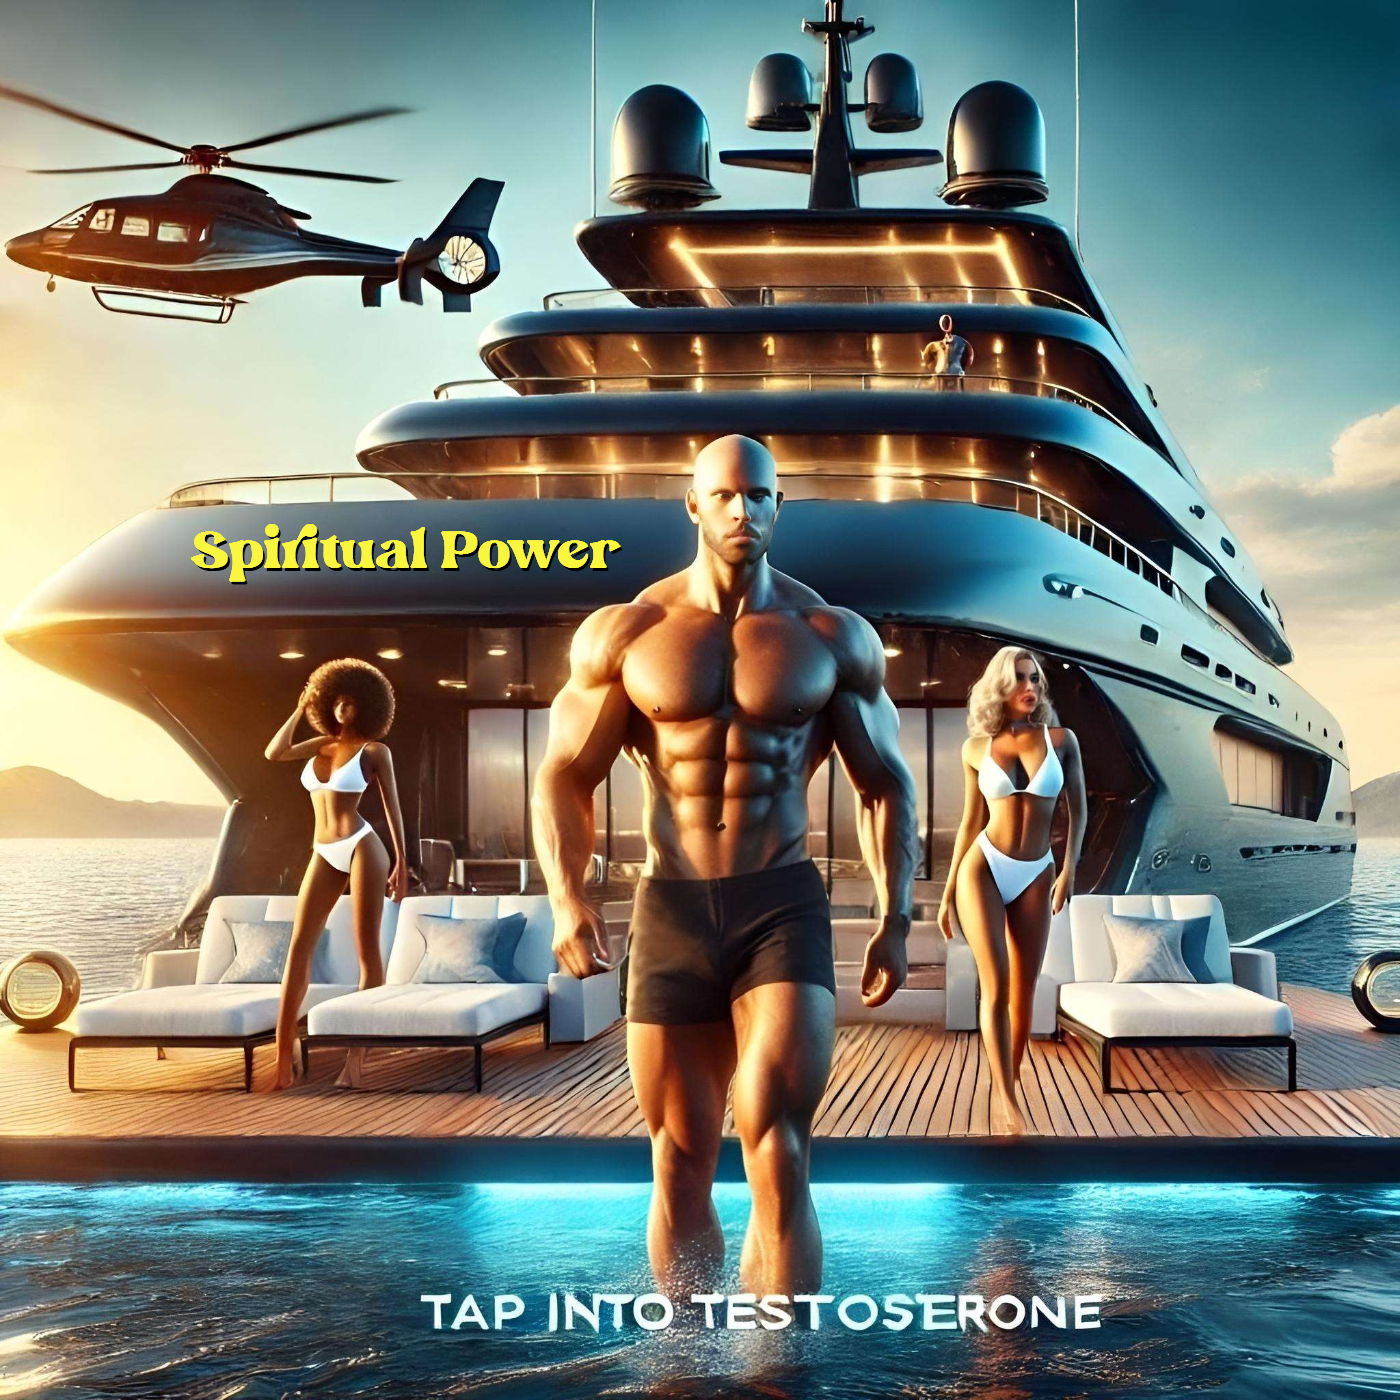 The Truth About Testosterone: Harnessing Your Power